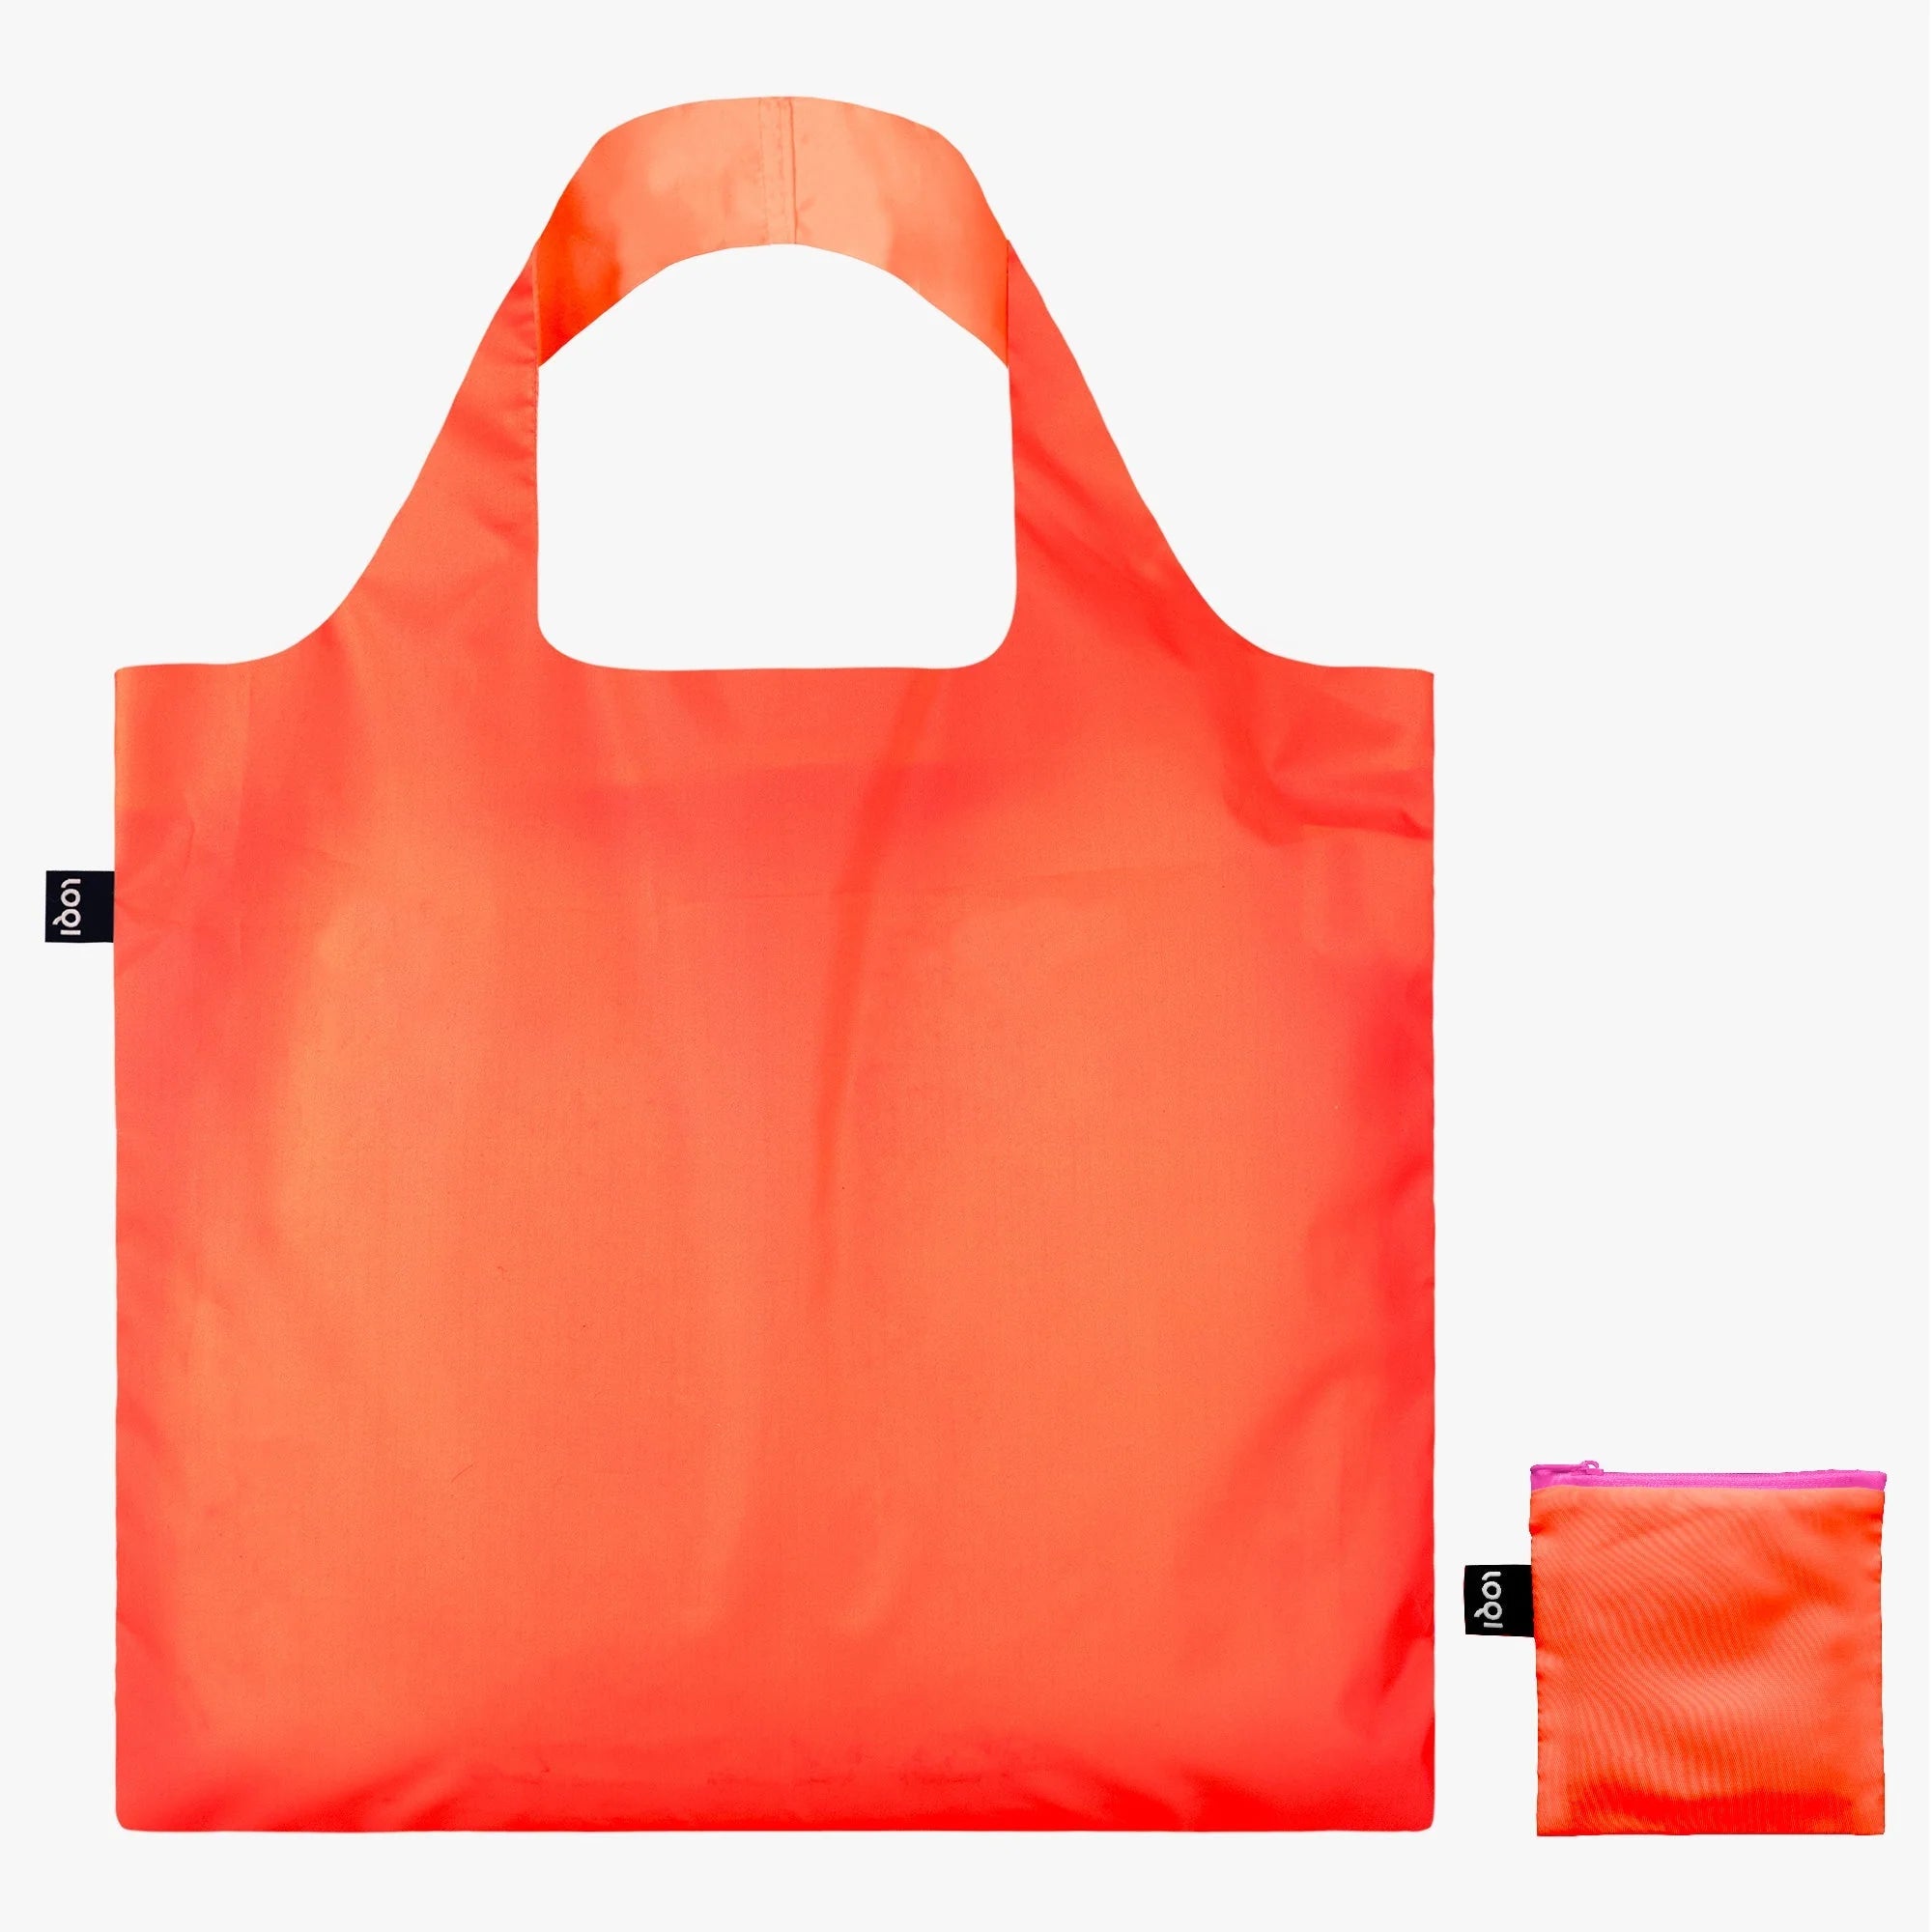 Sustainable Living Loqi Neon Dark Orange Recycled Bag by Weirs of Baggot Street